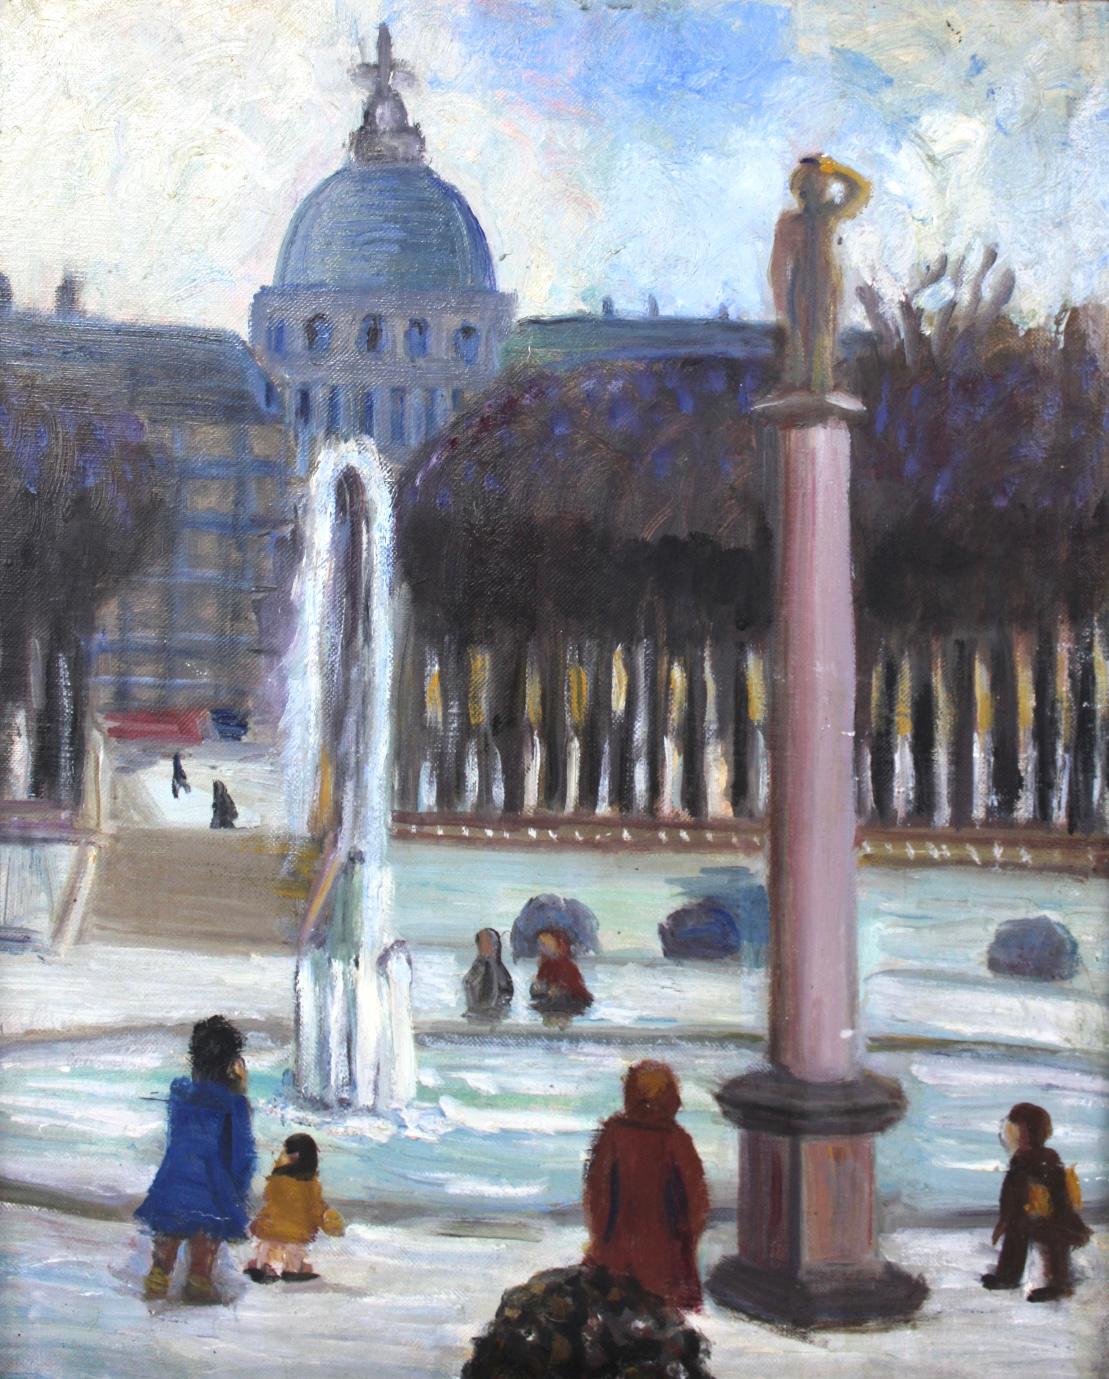 Unknown Figurative Painting - Winter in Paris, Original Vintage Oil on canvas, French Impressionist Style